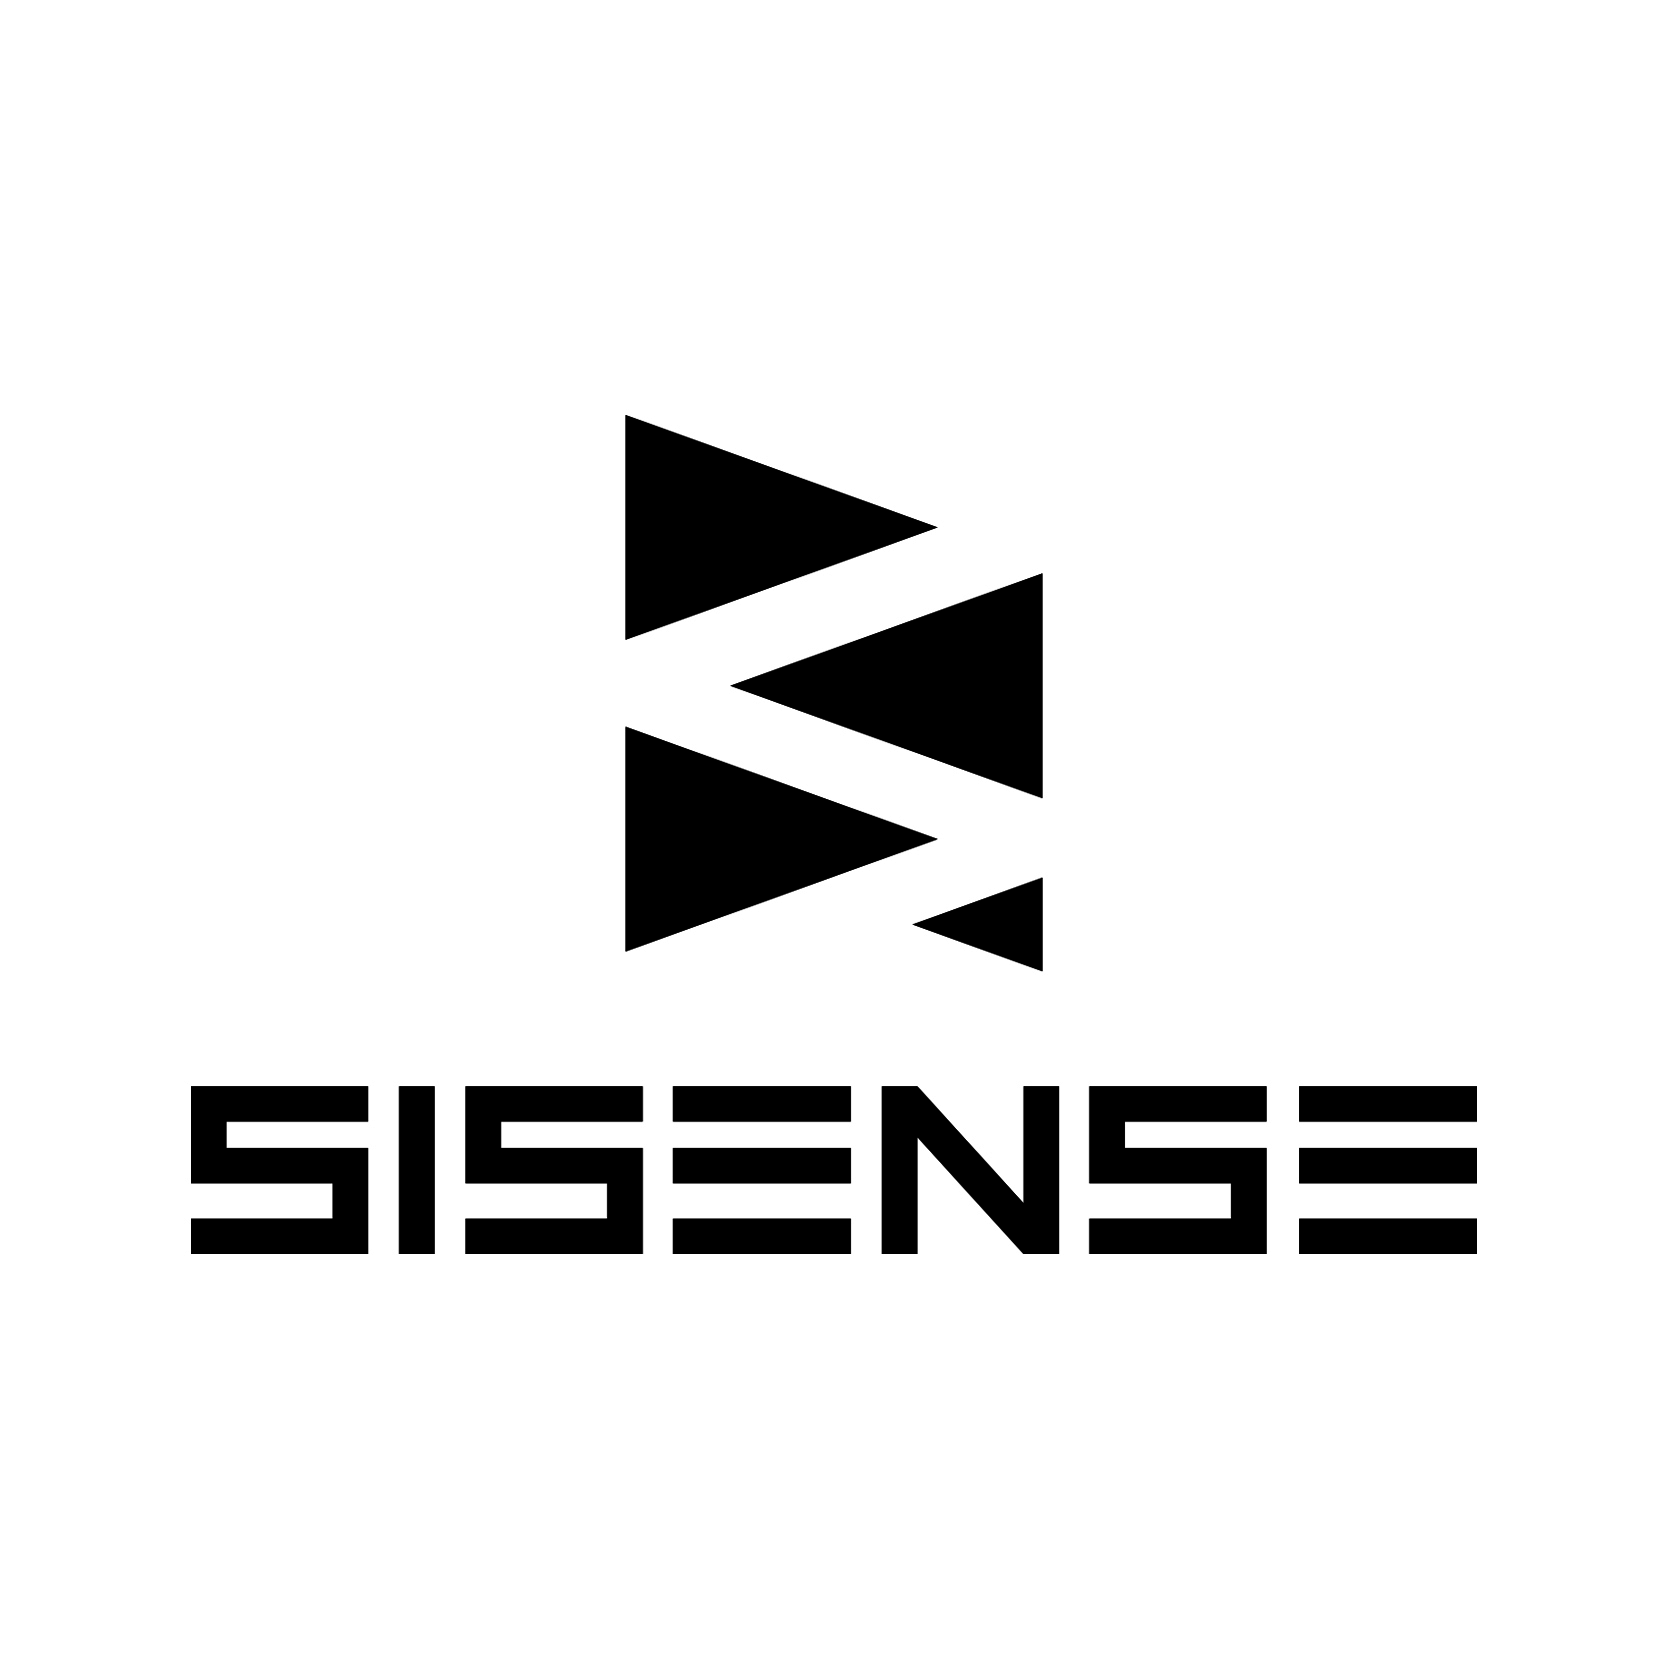 From dirty data to healthy companies: SiSense CEO shares the surprising